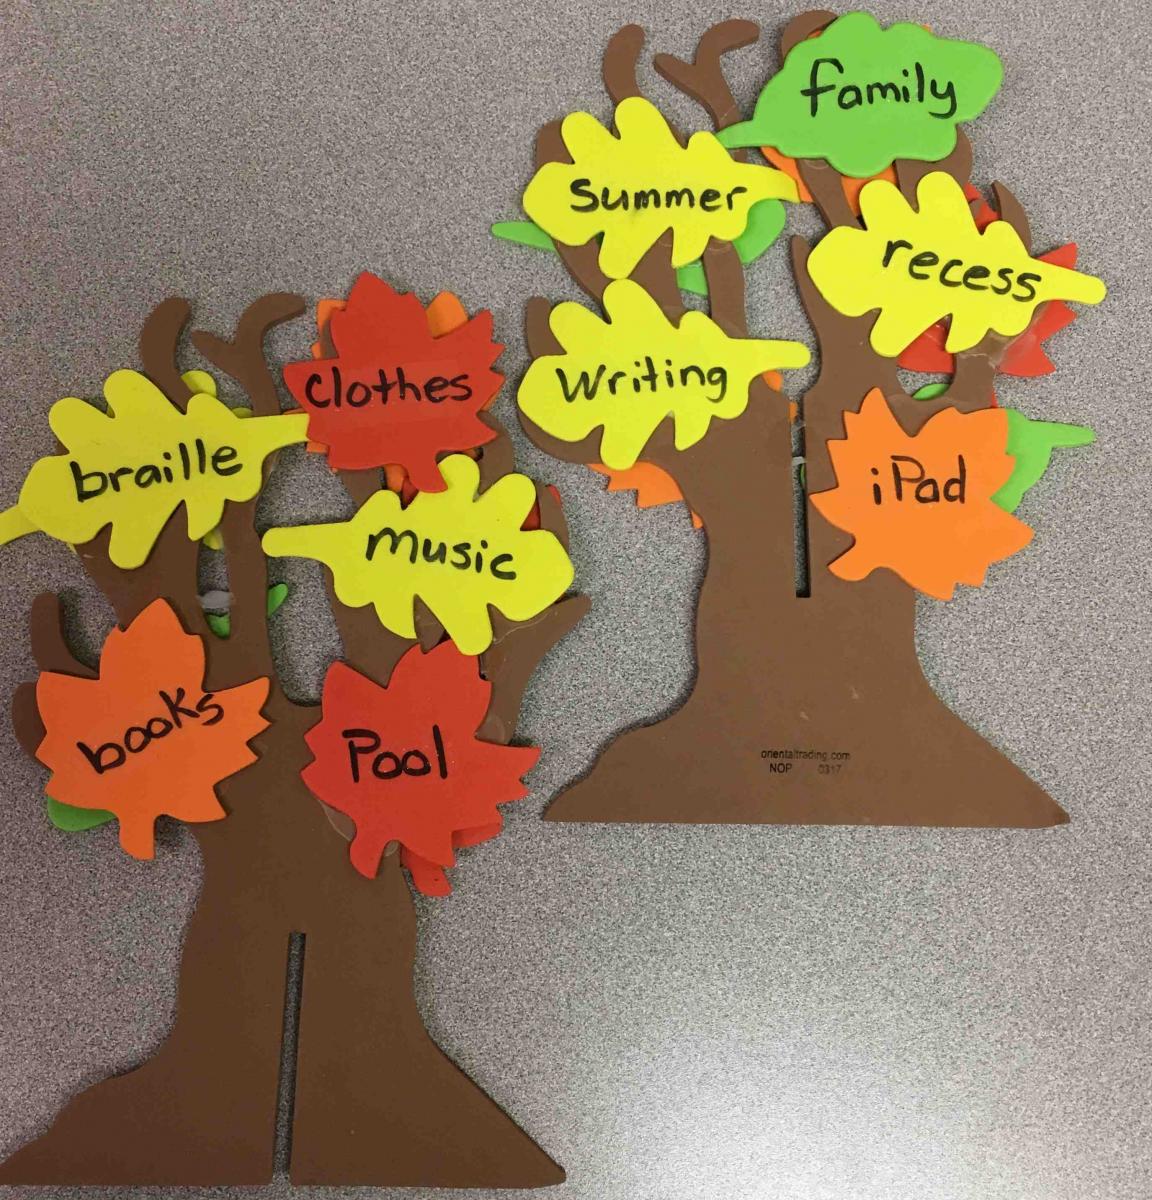 Leaves on trees: braille, clothes, music, pool, books, summer, family, recess, writing, iPad